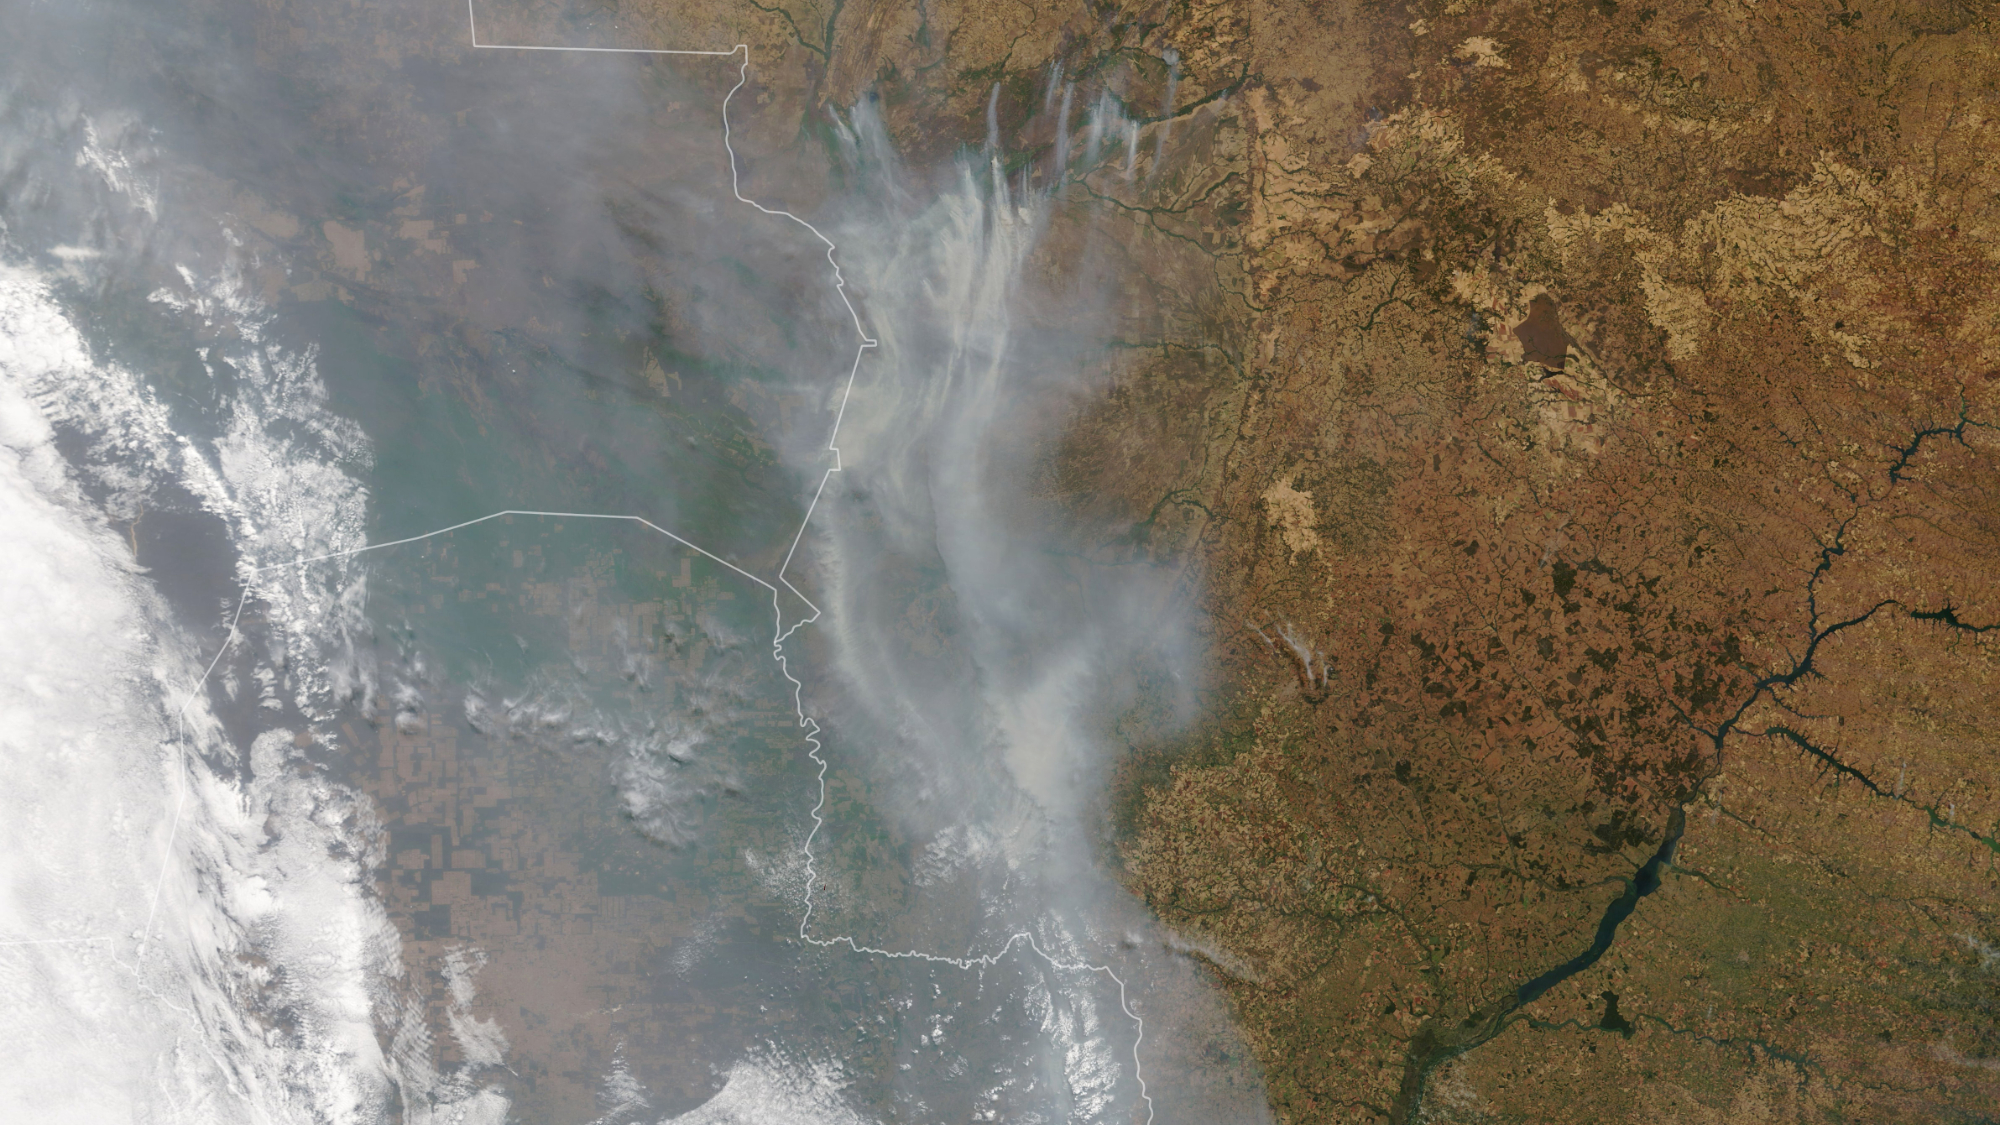 Wildfires burned a staggering 30% of Brazil's Pantanal wetlands in 2020, satellite data shows